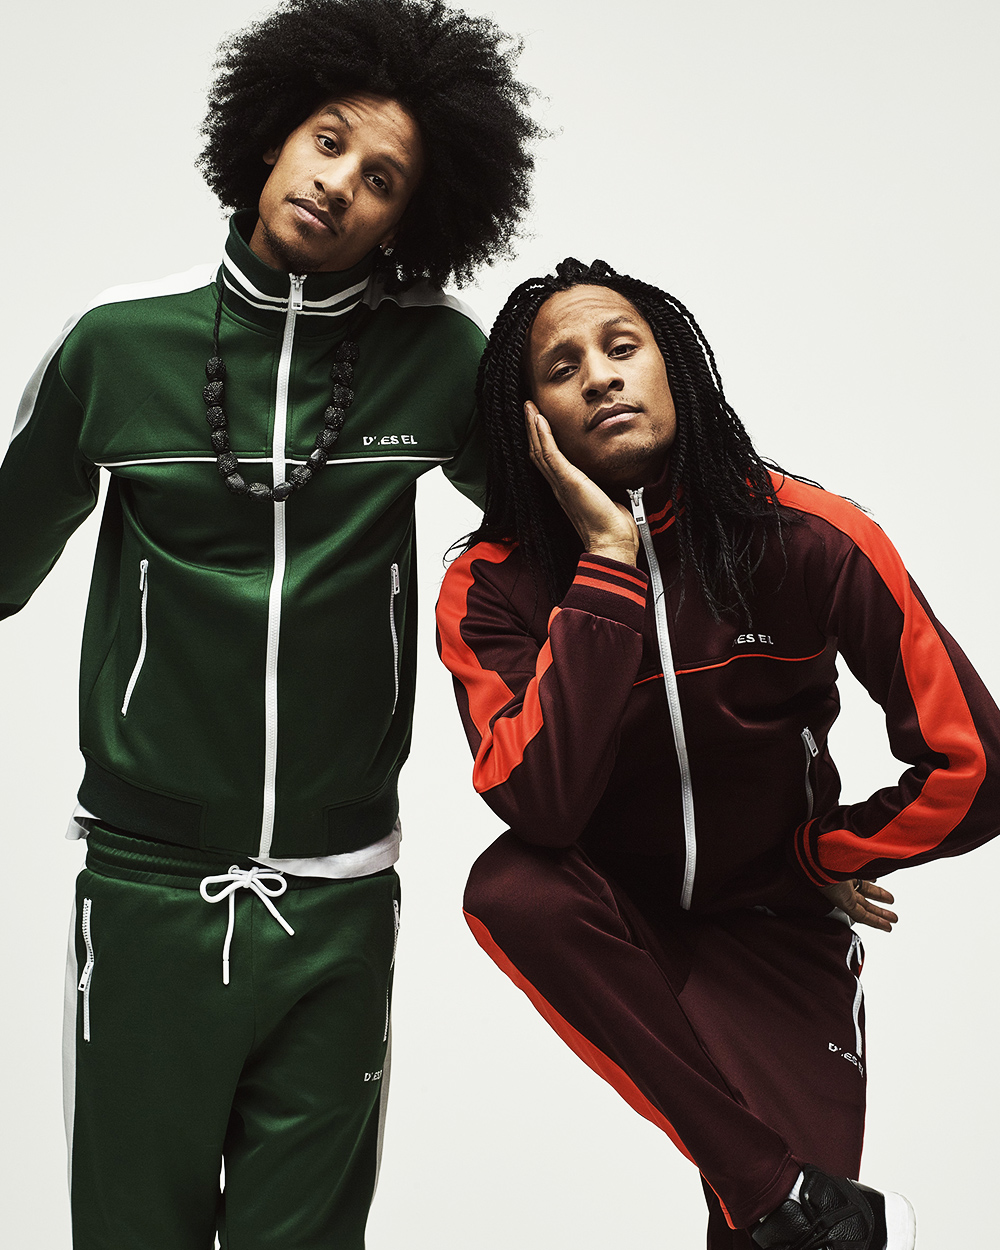 Article, Writing, And Articles Image - Only The Brave Street De La Marque Diesel Les Twins - HD Wallpaper 